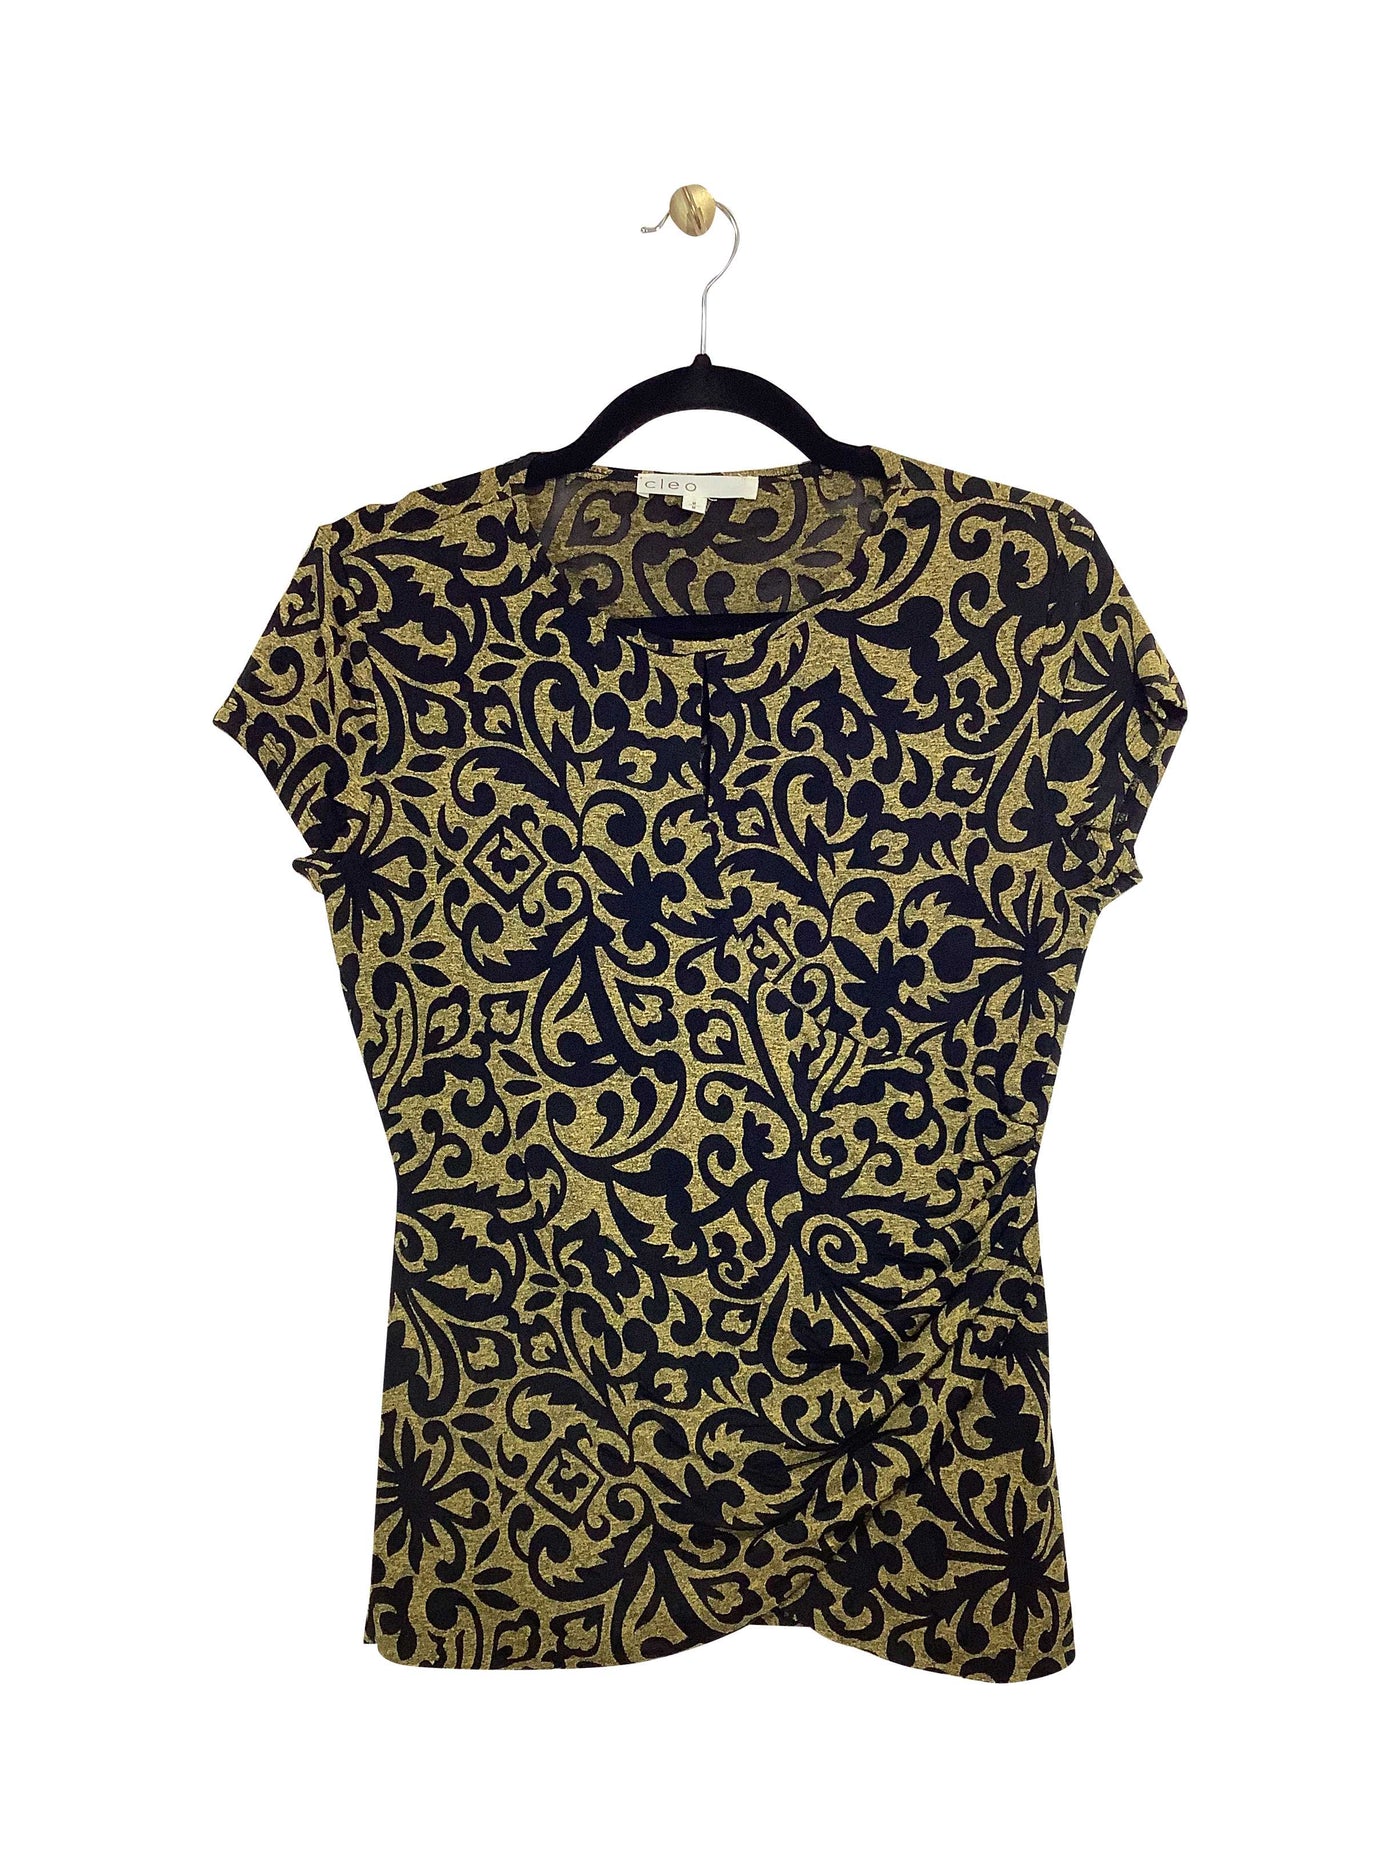 CLEO Regular fit Blouse in Yellow - Size M | 16.9 $ KOOP